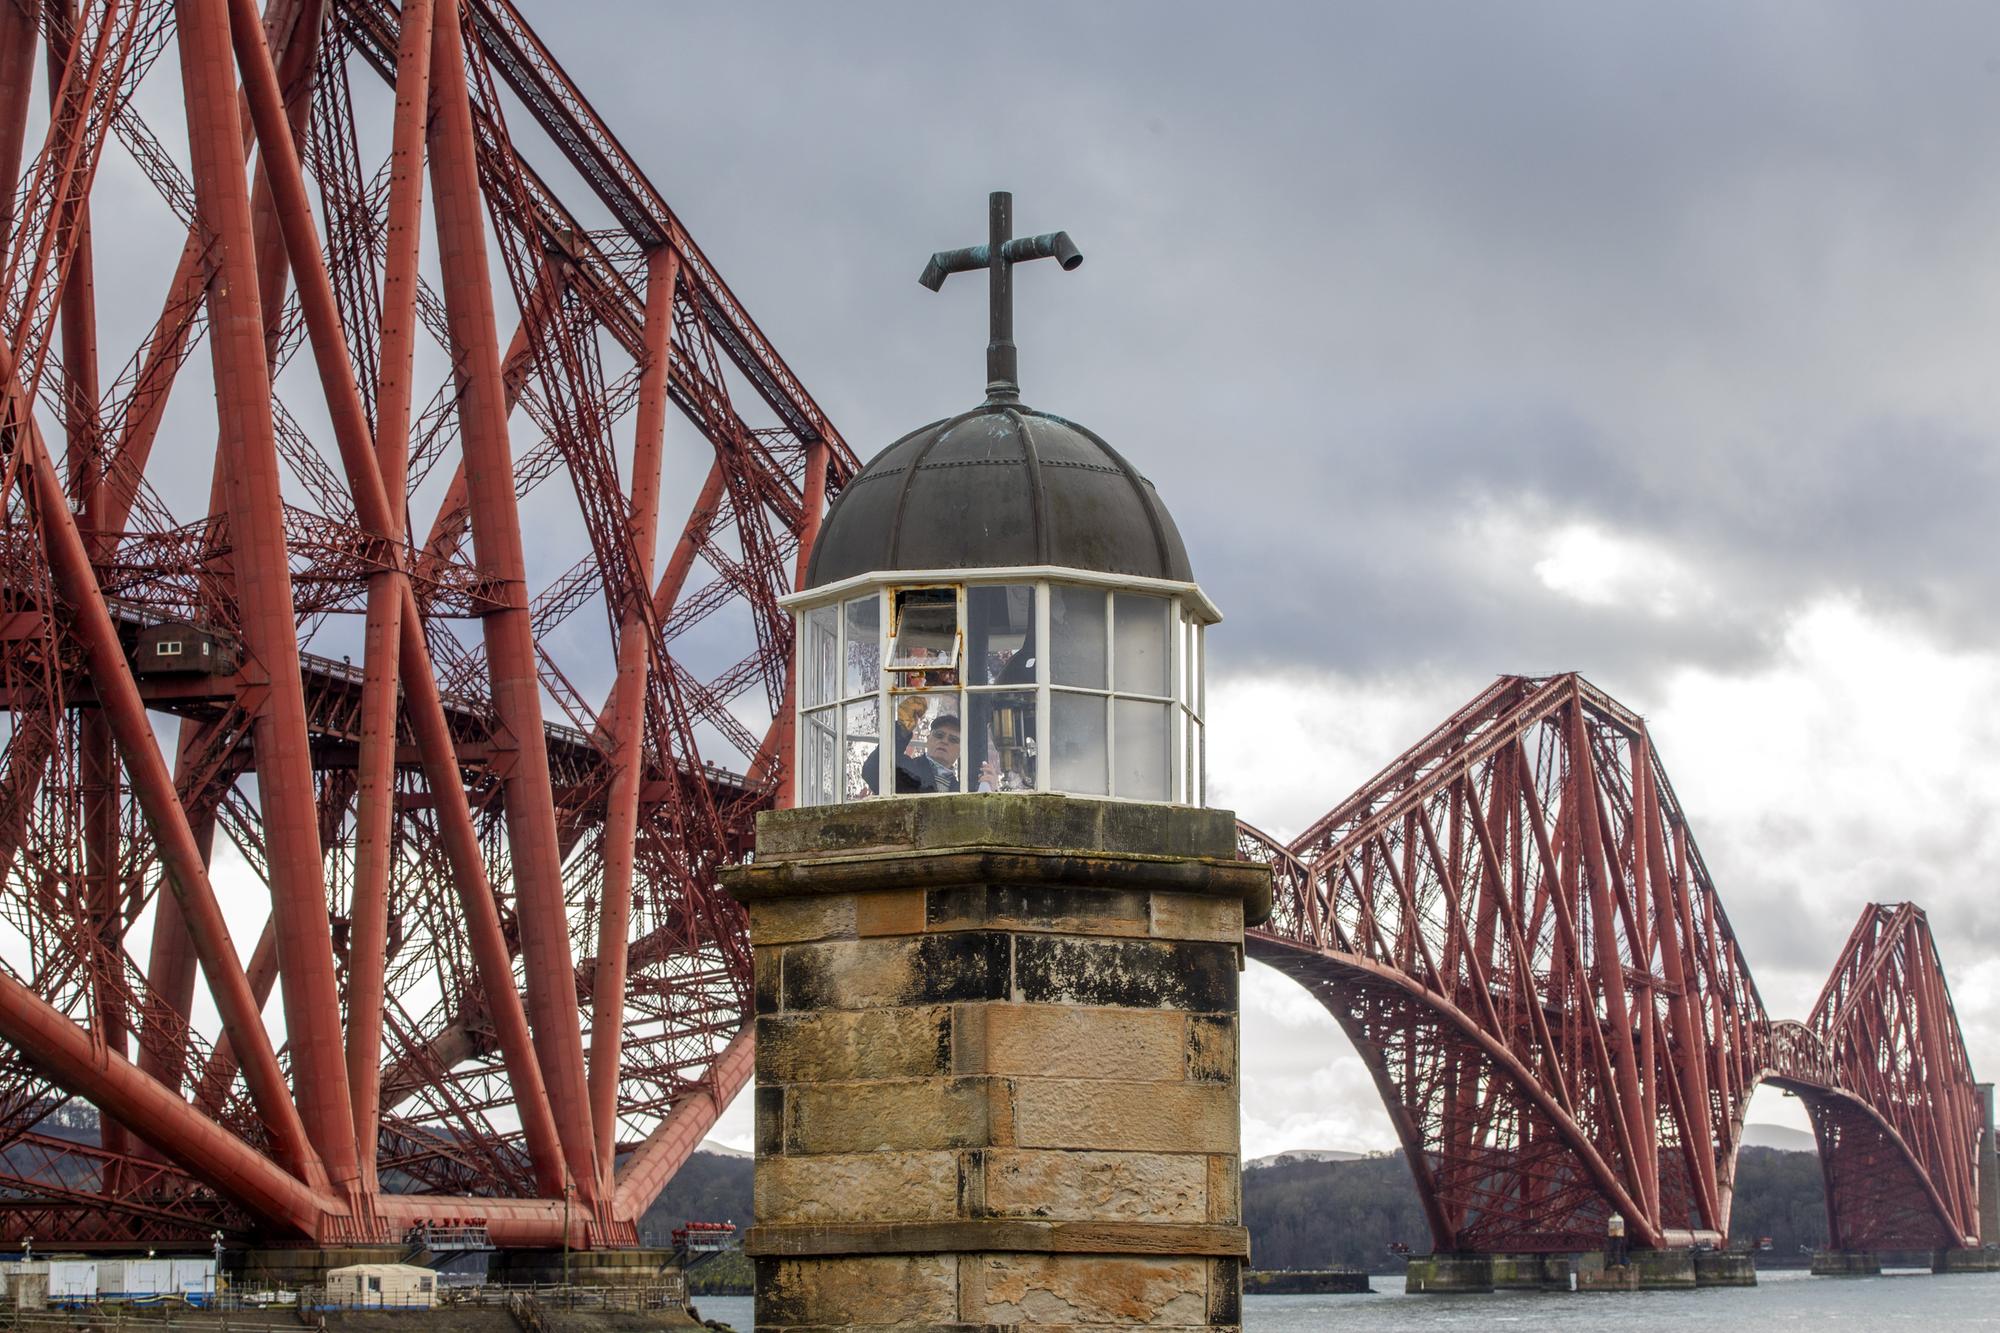 inside the world's smallest working 'lighthouse' in the forth which can shine for three miles and is powered by vegetable oil